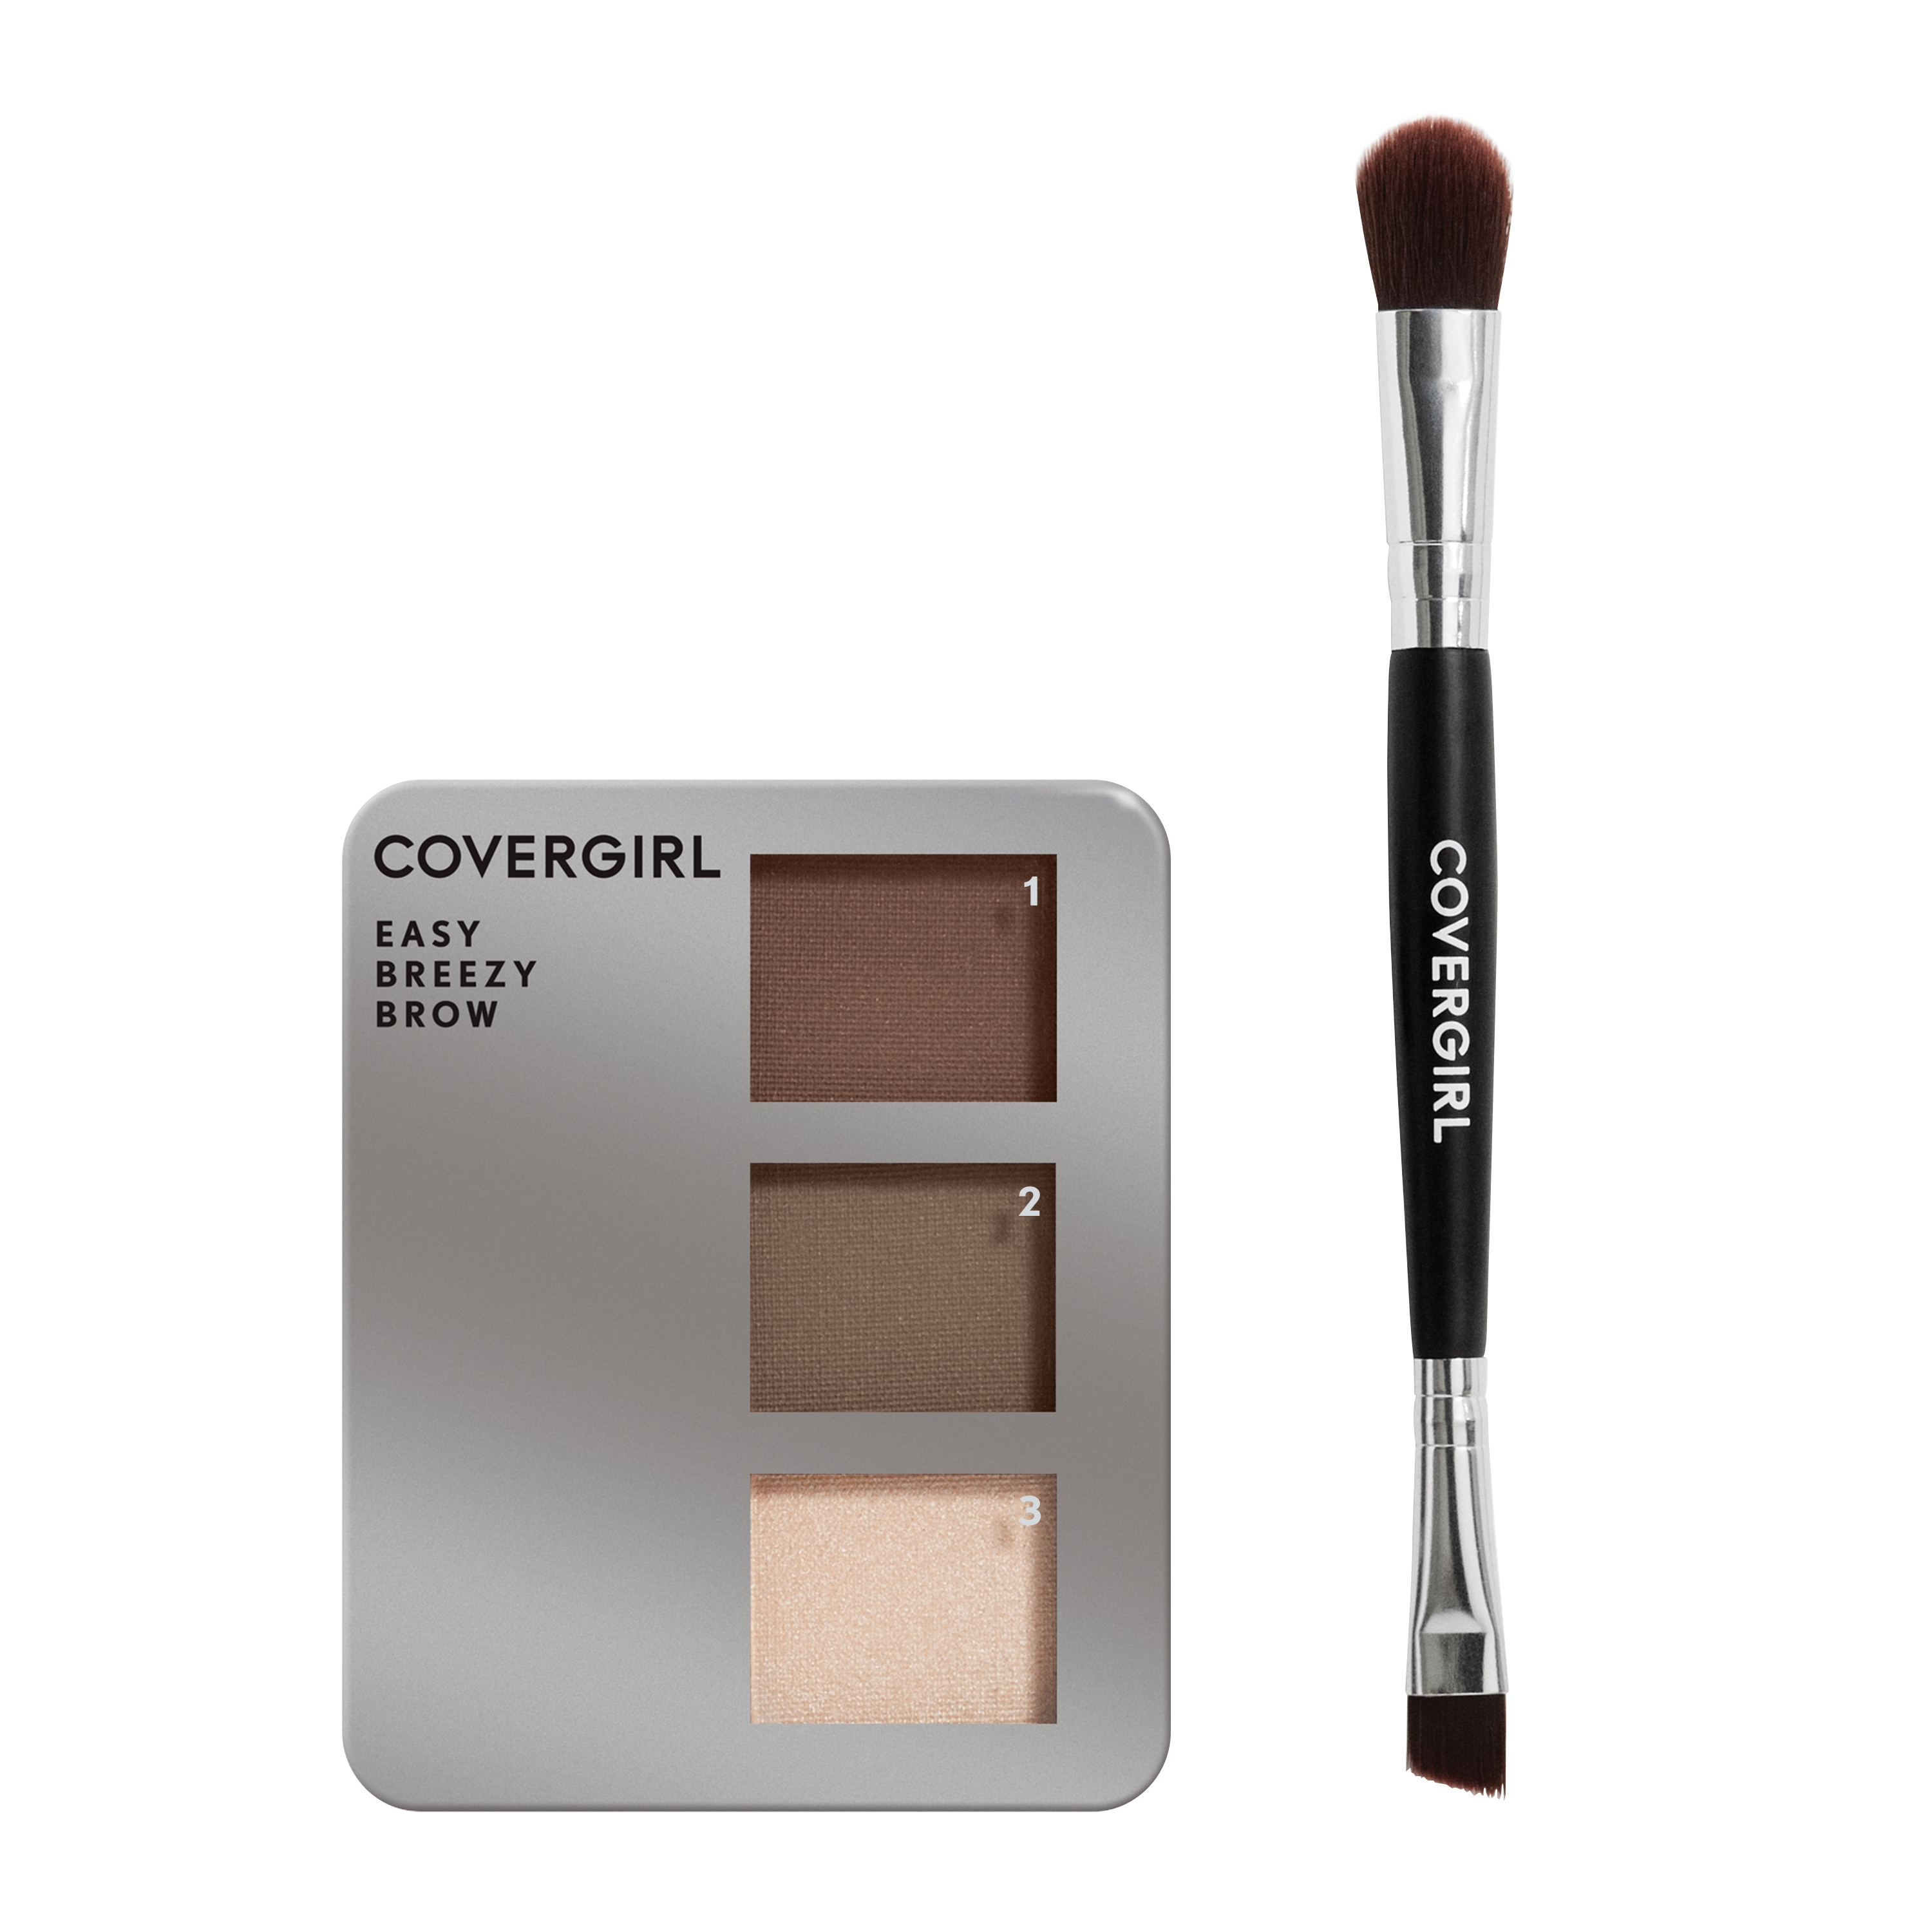 COVERGIRL Easy Breezy Brow Powder Kit, 705 Rich Brown, 0.008 oz, Eyebrow Powder, Eyebrow Kit, Eyebrow Powder Kit, Eyebrows, Includes Double-Ended Fluffy and Angeled Brush - image 1 of 8